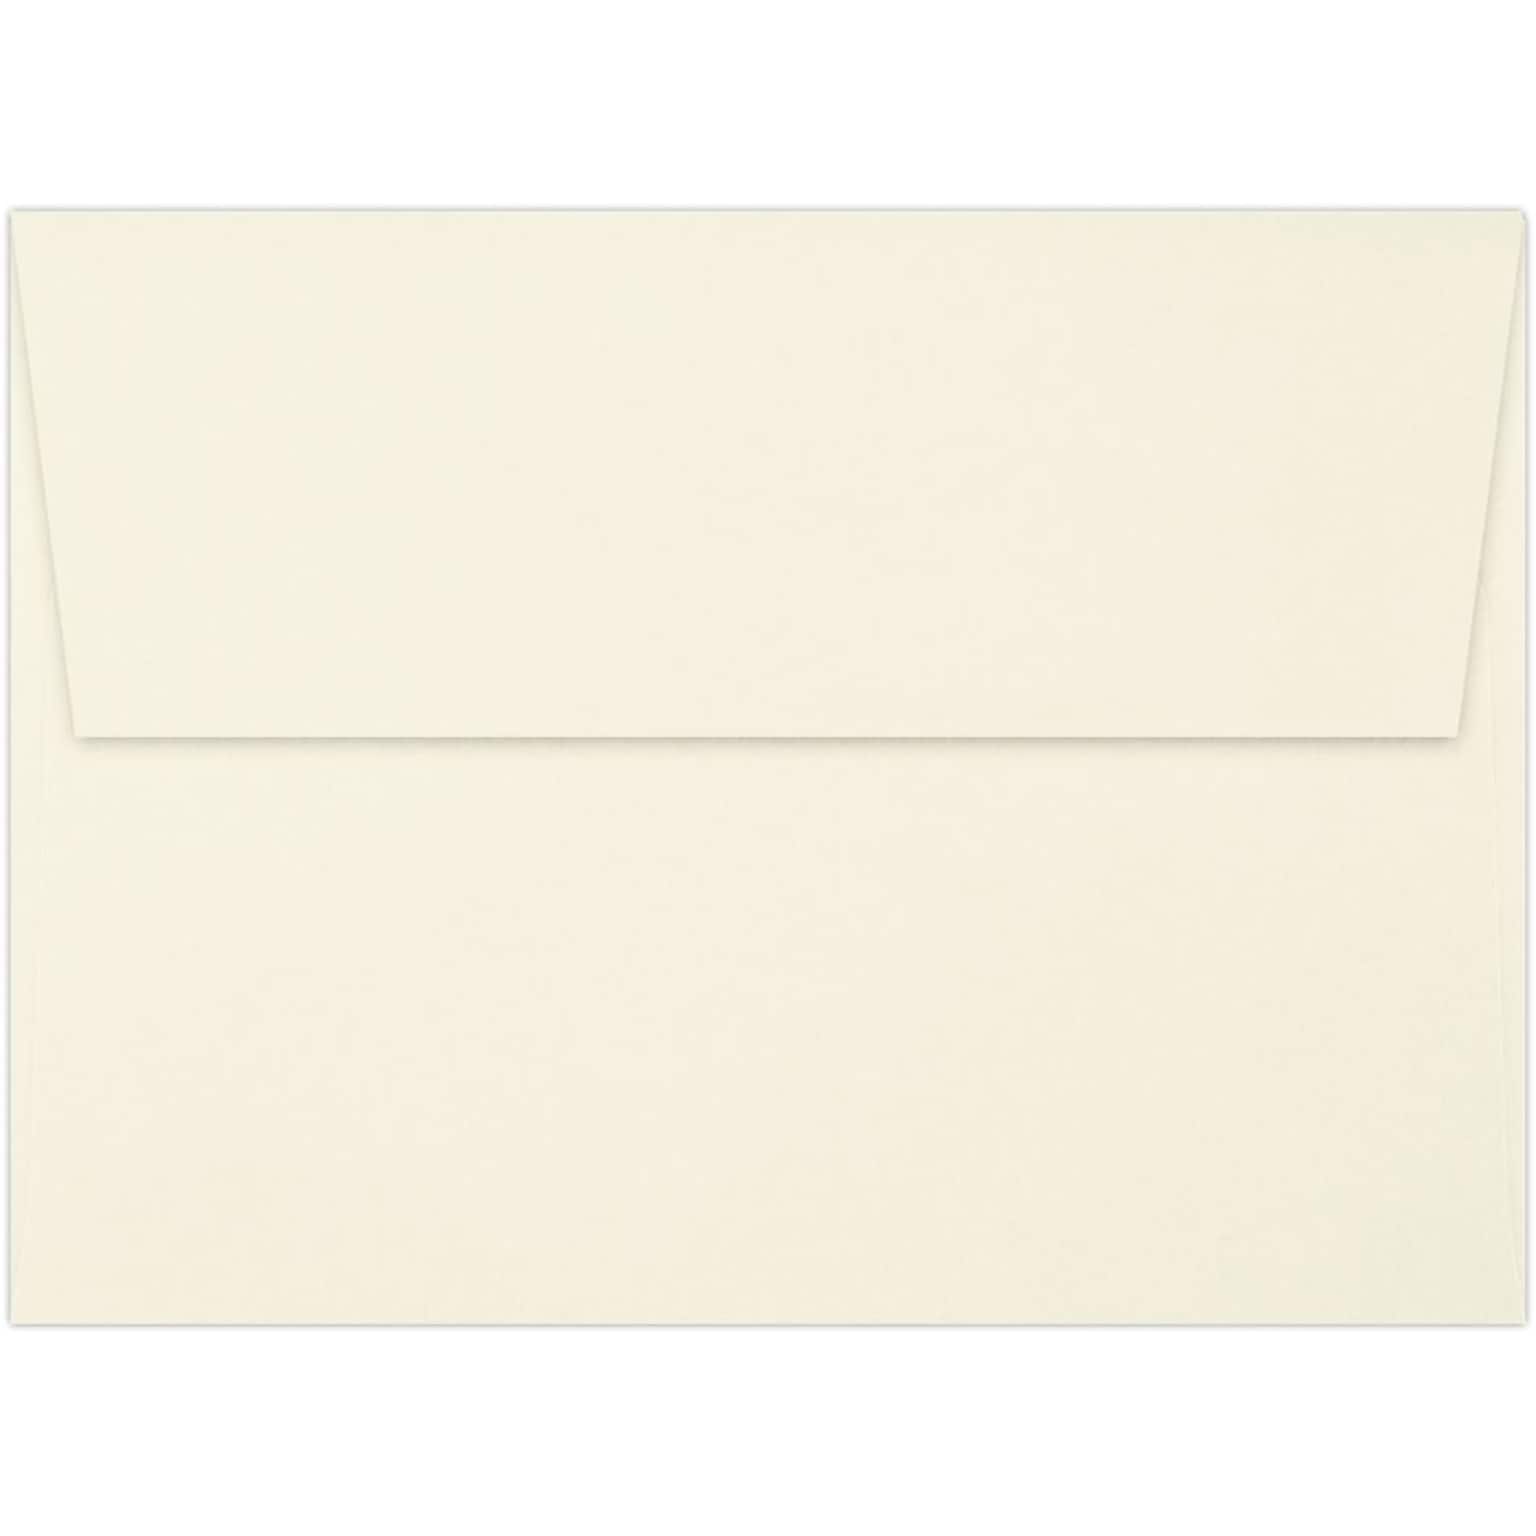 LUX A7 Invitation Envelopes (5 1/4 x 7 1/4) 500/Pack, Classic Linen® Baronial Ivory (4880-70BILI-500)